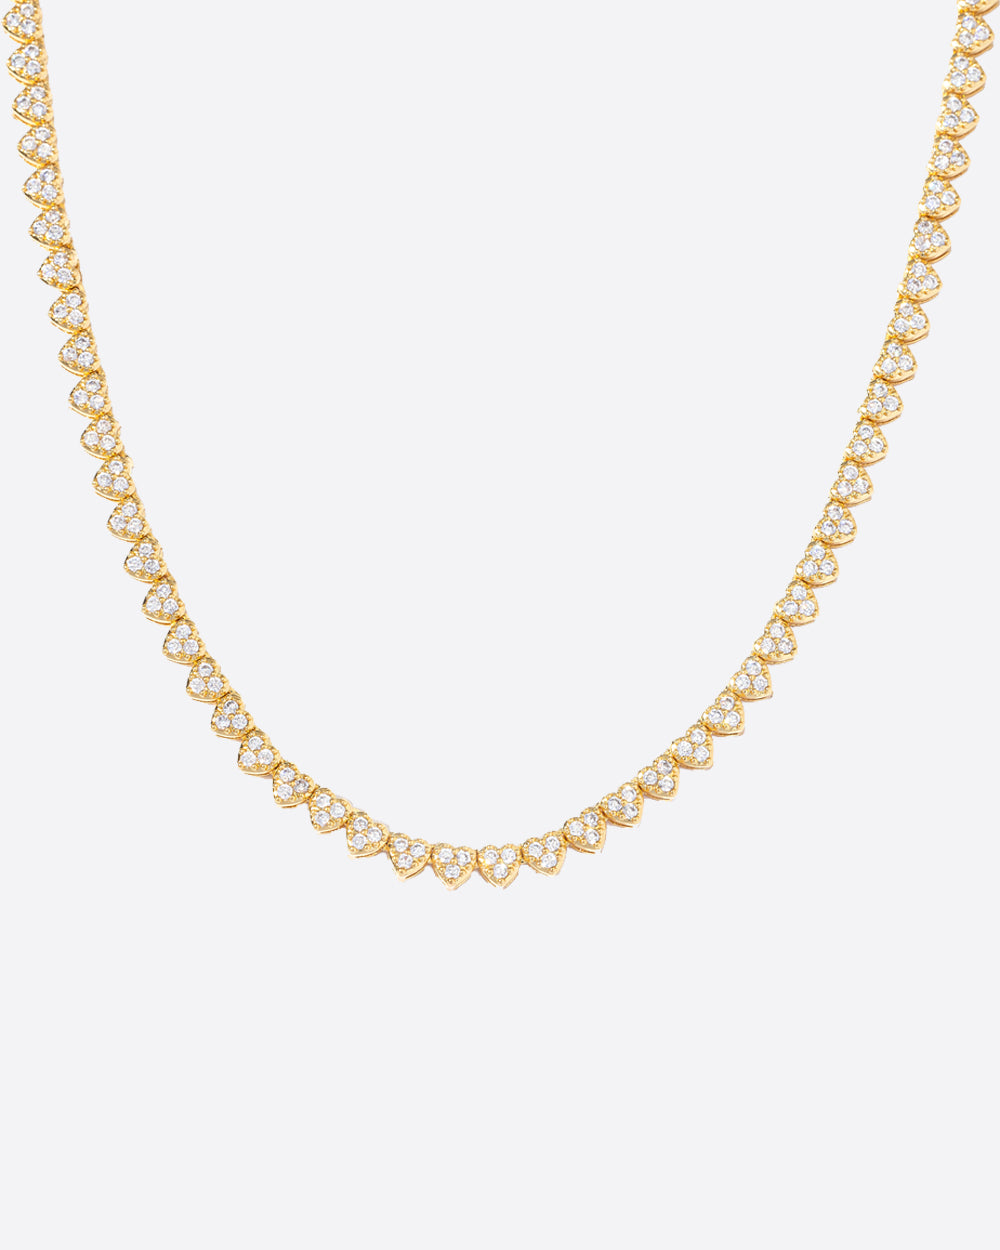 ICED HEARTS CHAIN. - 18K GOLD